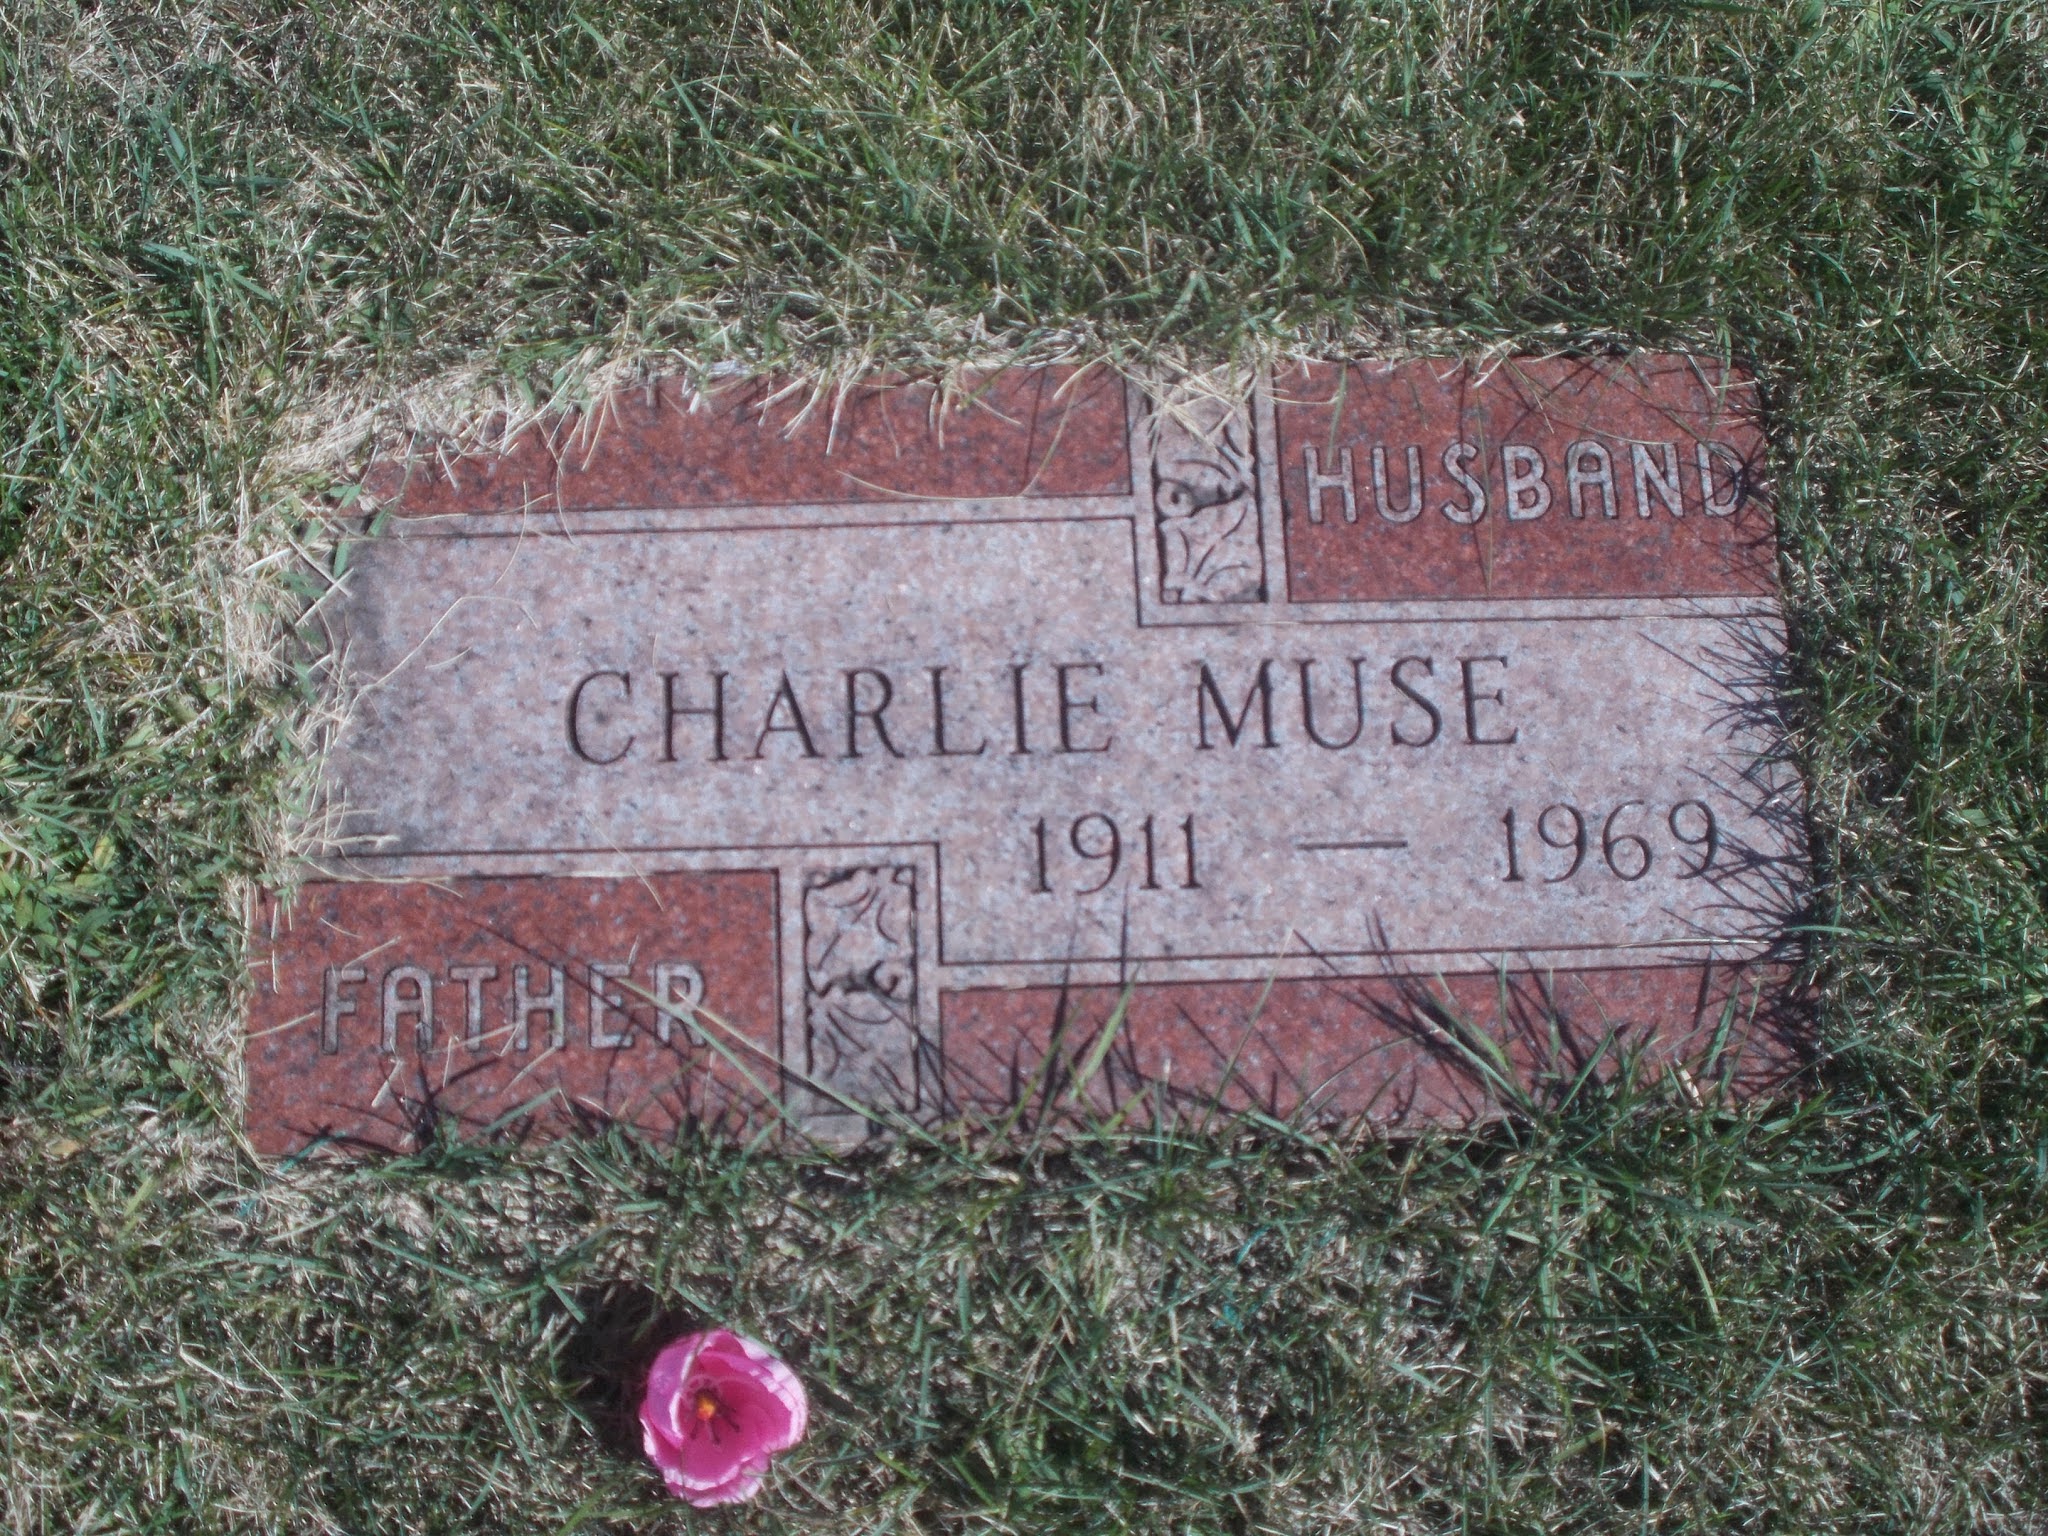 Charlie Muse